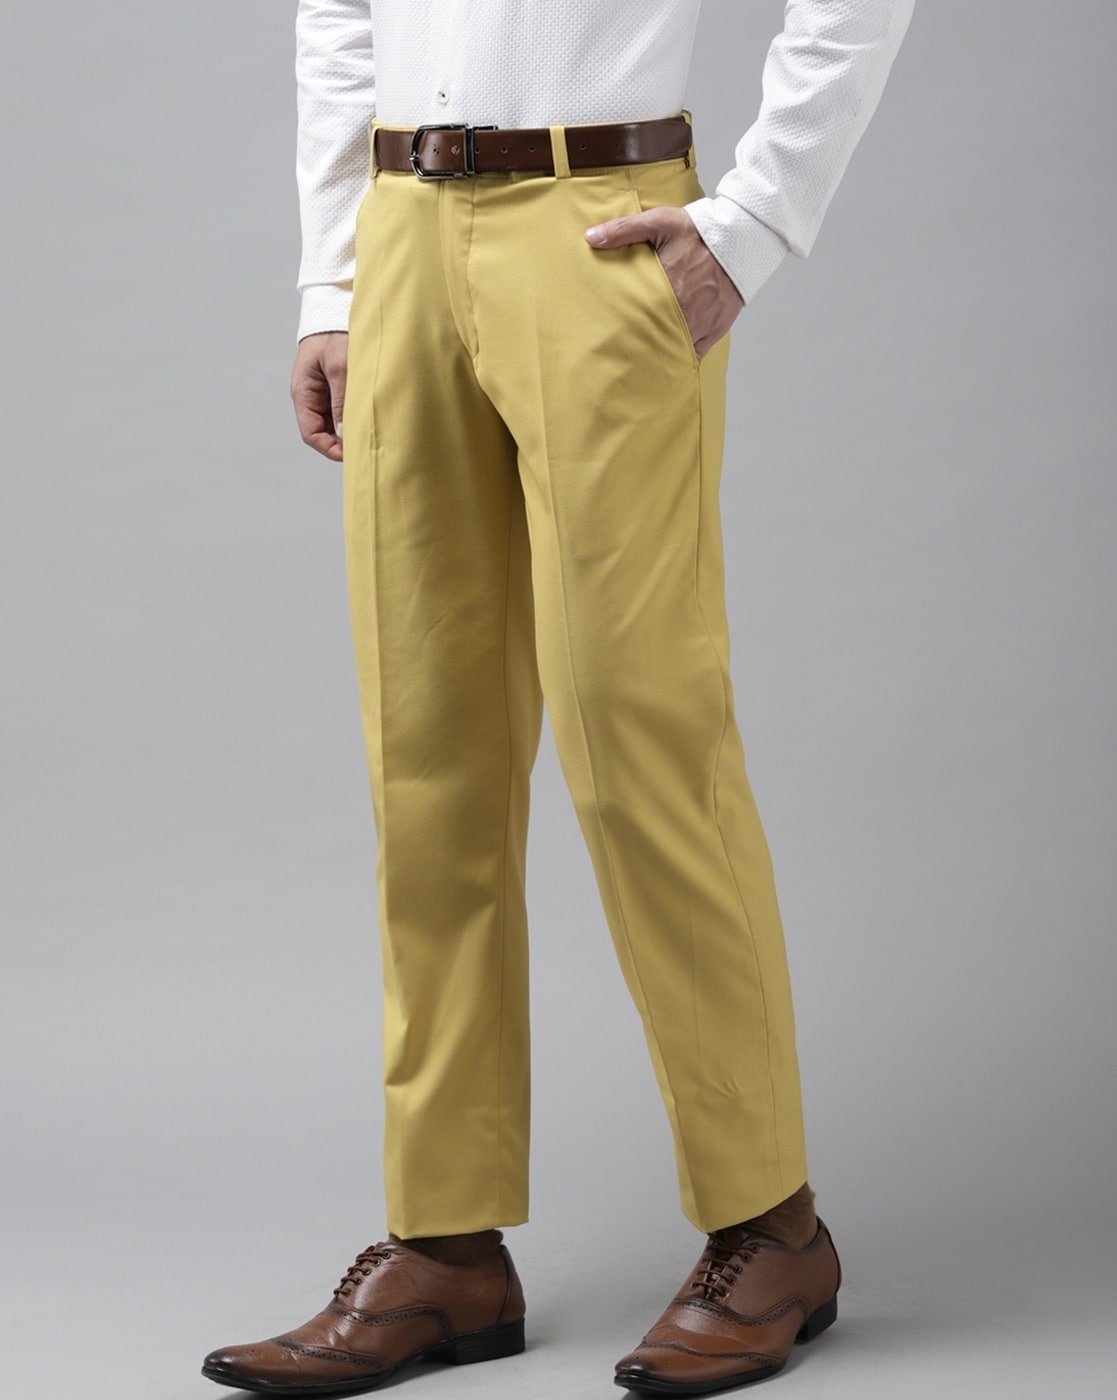 Buy Yellow Trousers for Women Online